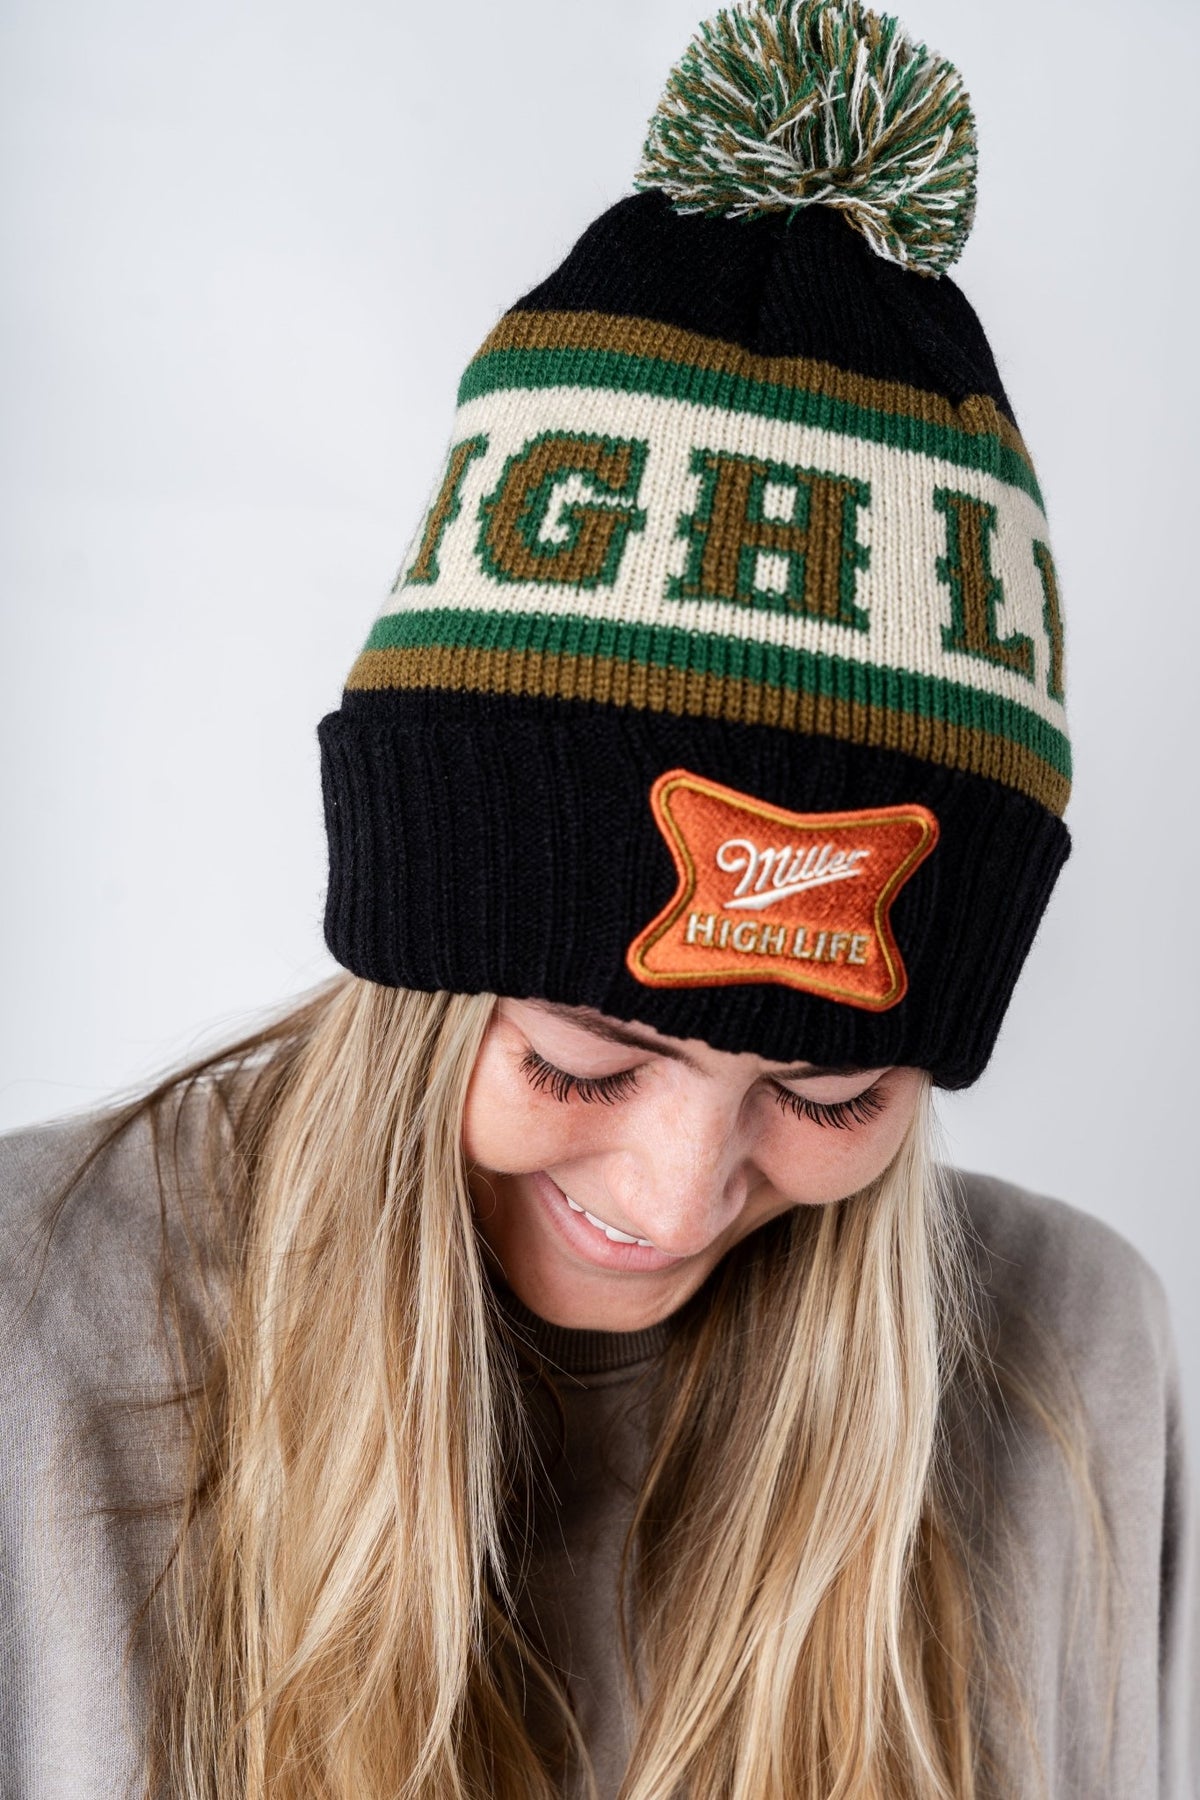 Miller High Life pillow pom beanie black - Trendy Gifts at Lush Fashion Lounge Boutique in Oklahoma City